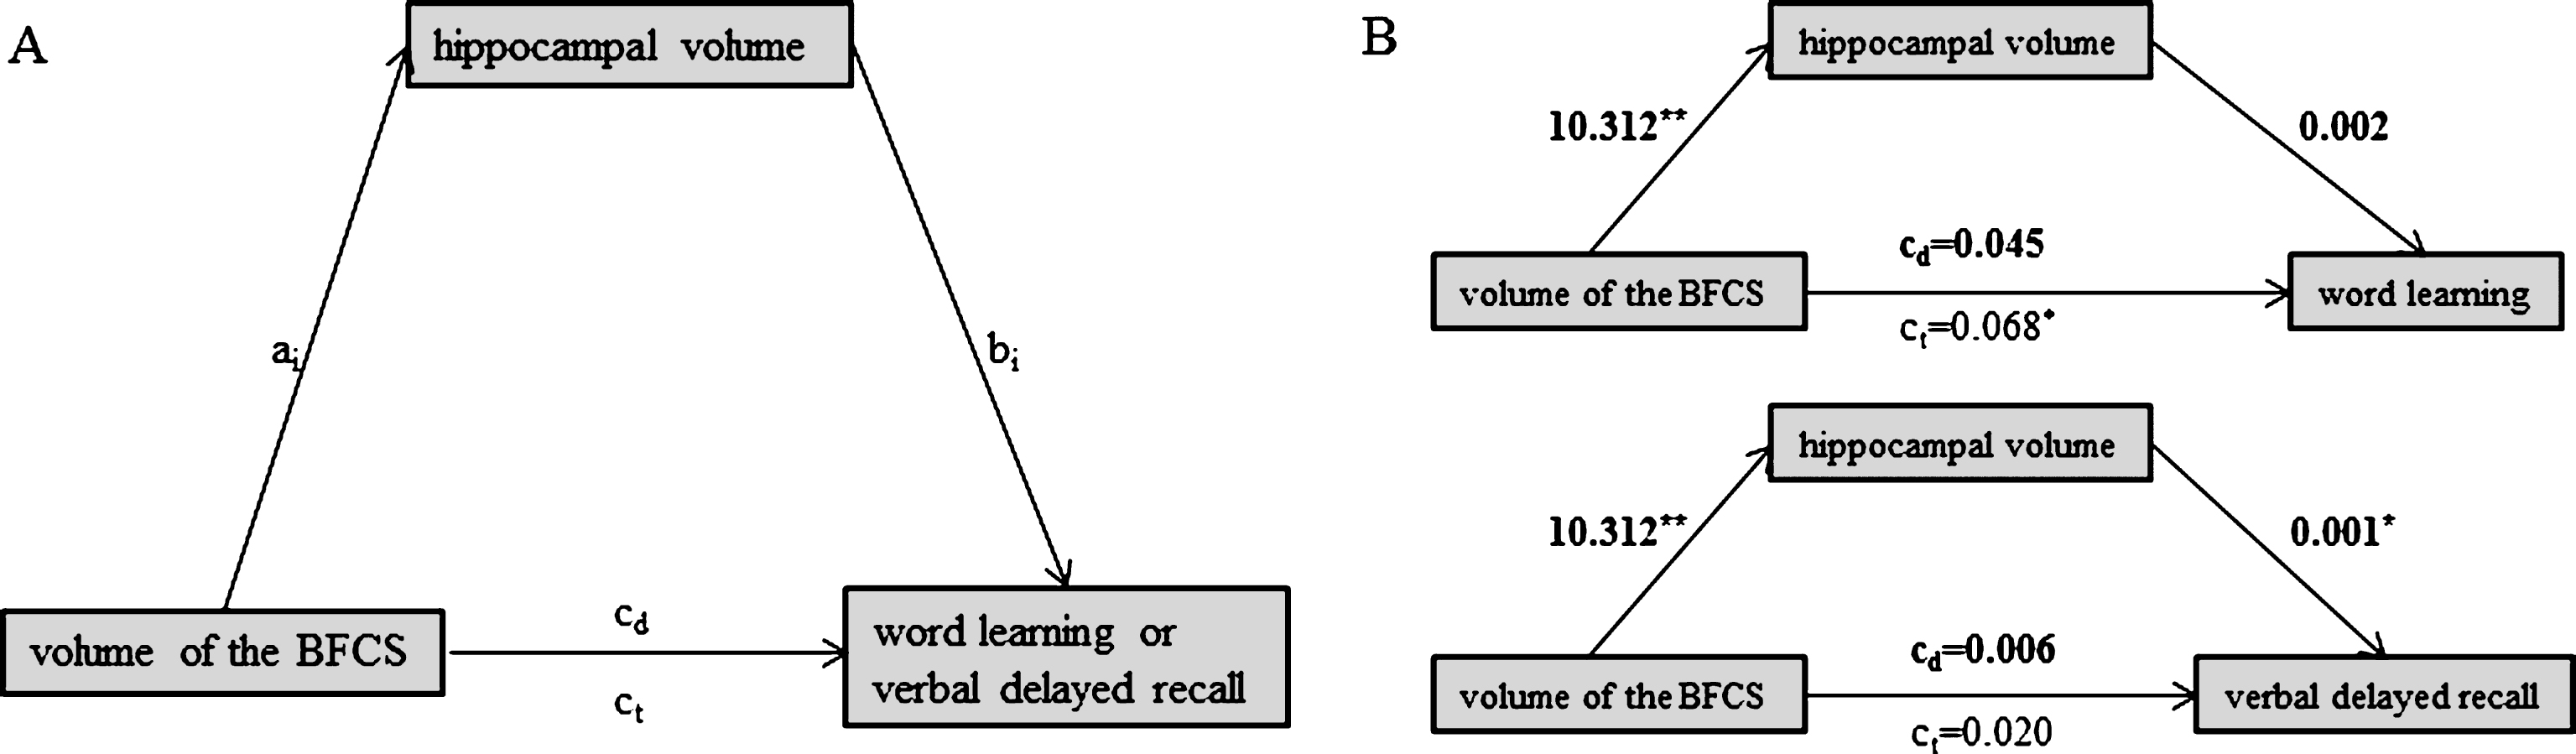 Schematic of mediation (A) and the calculated mediating effects of hippocampal volume on the relationship between BFCS and word learning (B, top) or verbal delayed recall (B, bottom). All path weights refer to standardized regression coefficients; ct denotes the total effect and cd the direct effect of the predictor on the outcome variable. *Significant at α= 0.05, **α= 0.01, ***α< 0.001, two-tailed.